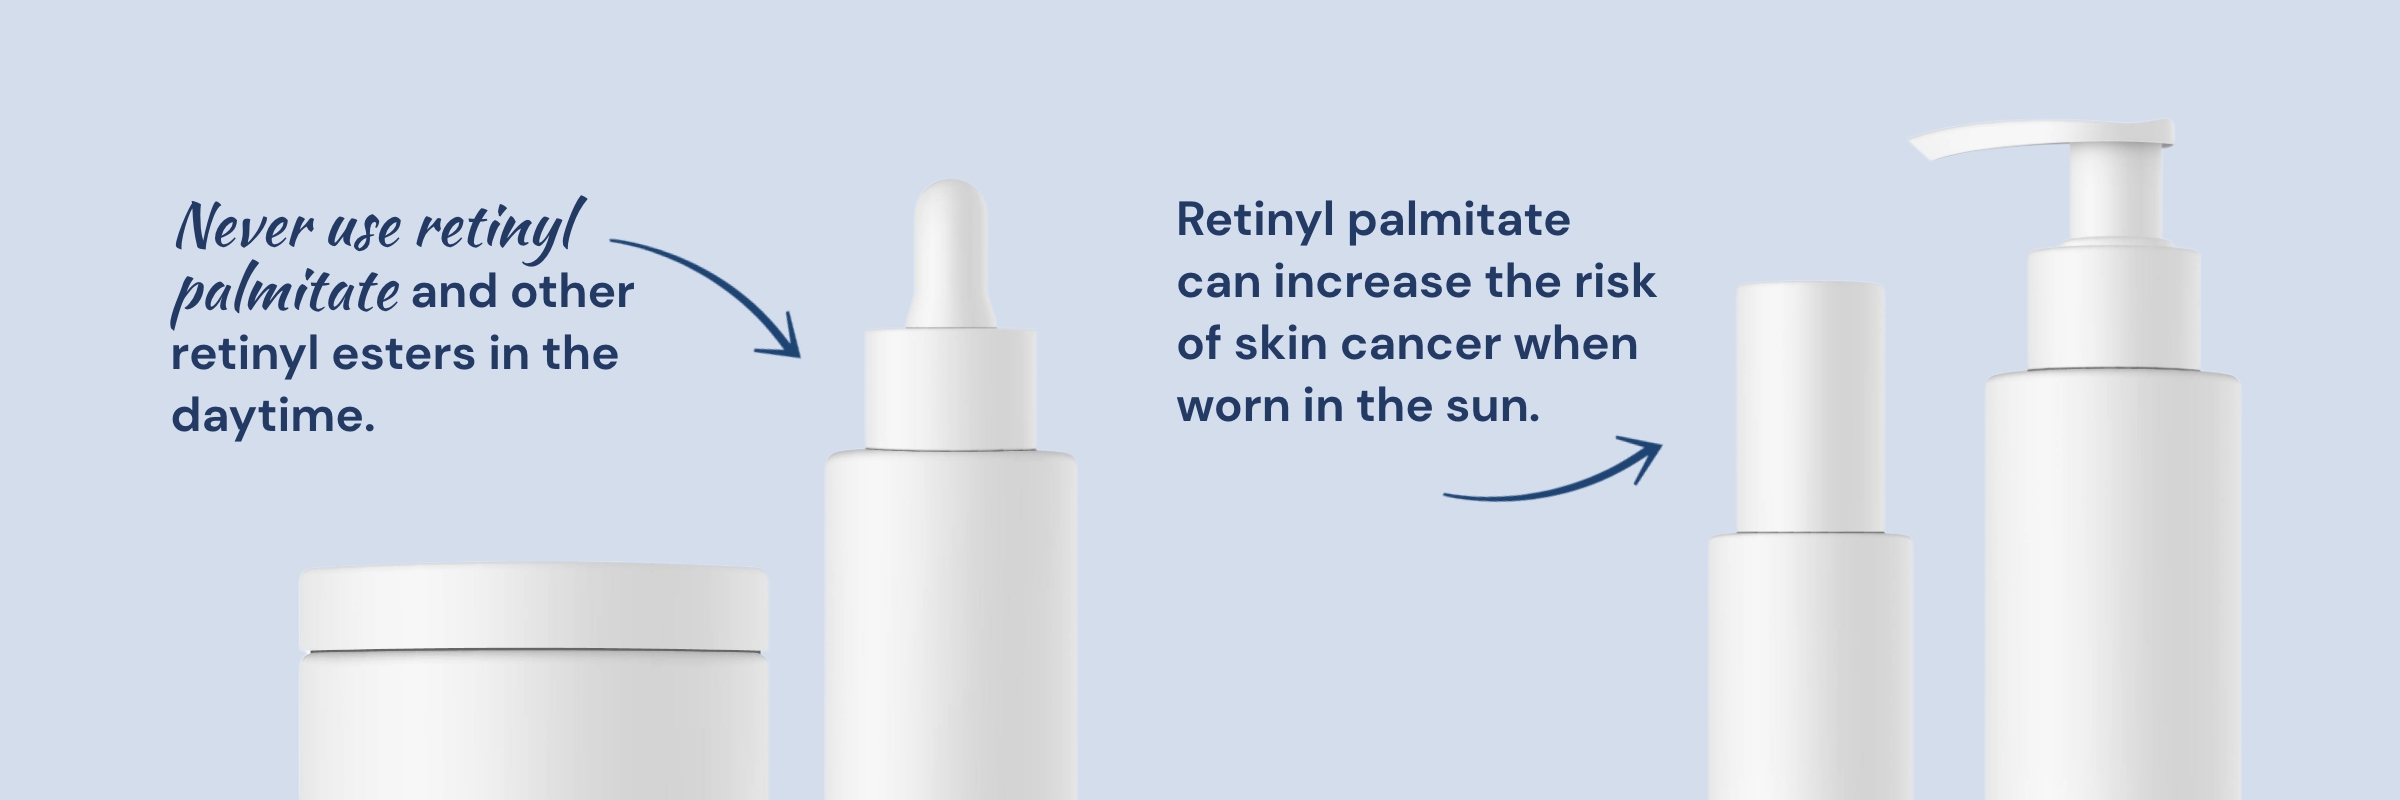 retinyl palmitate can increase the risk of skin cancer when worn in the sun